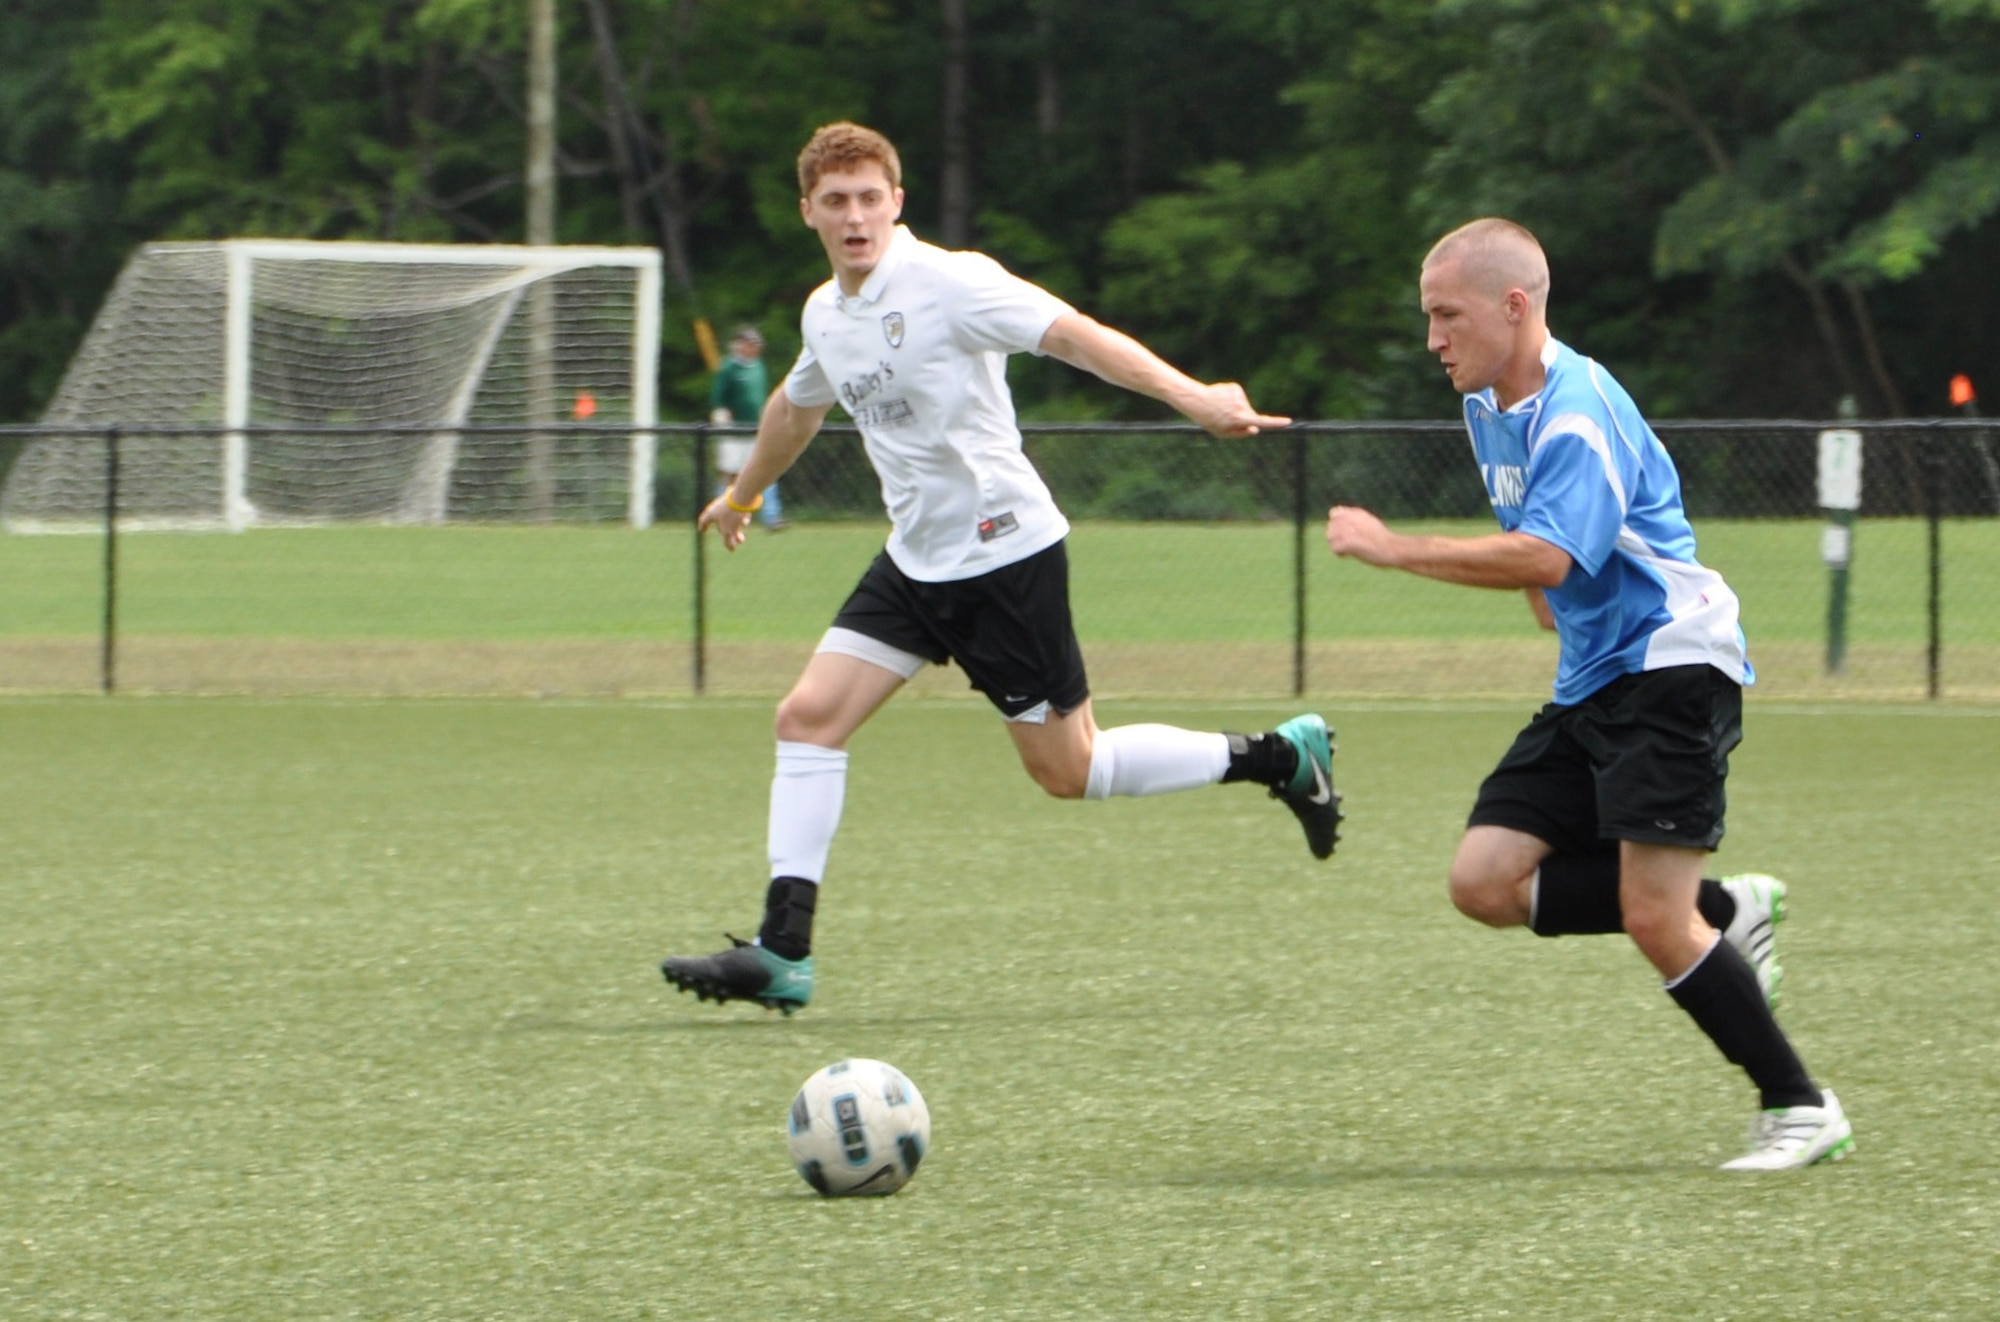 Travis Elswick, a Langley Raptors forward, dribbles the ball during a game at the Hampton Roads Soccer Complex in Virginia Beach, Va., Aug. 6, 2011. The Raptors will travel to Joint Base San Antonio, Texas, over the Labor Day weekend to participate in the annual Defender’s Cup, a national military invitational soccer tournament. Elswick is a staff sergeant assigned to the 1st Maintenance Squadron at Langley Air Force Base. (U.S. Air Force photo by Senior Airman Jason J. Brown/Released)